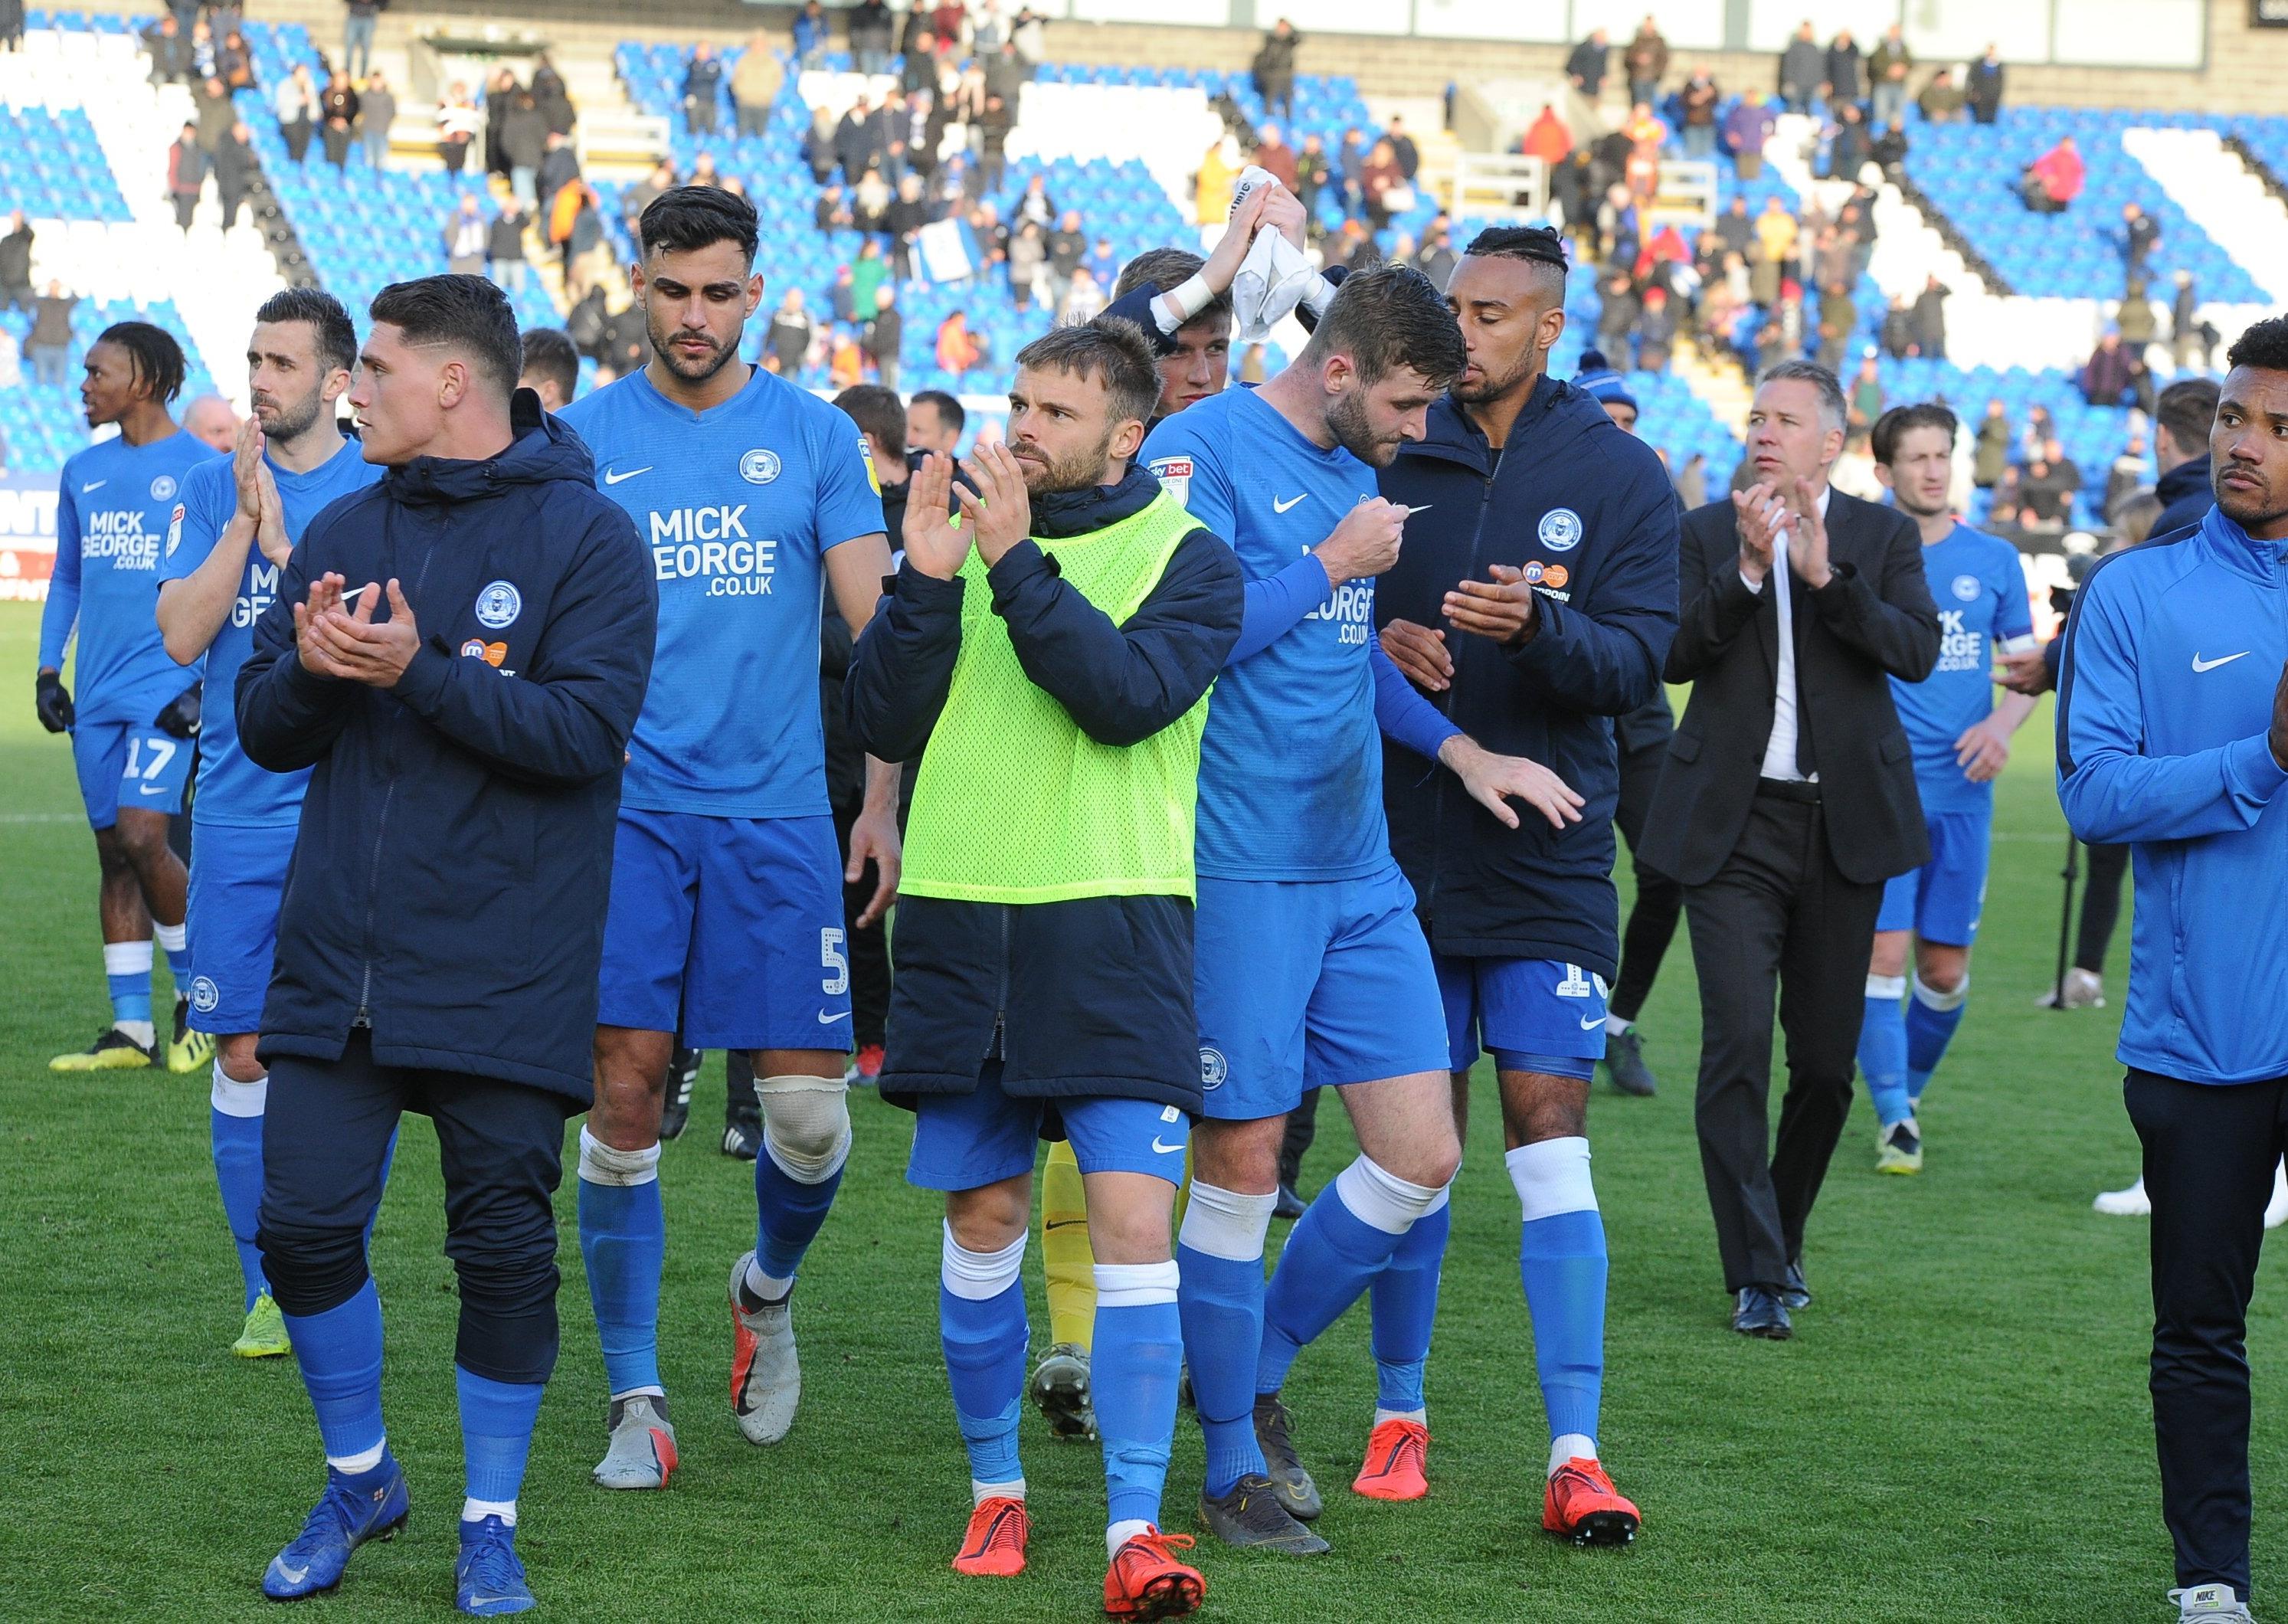 Posh players applaud the fans after the final game of the 2018-19 season.